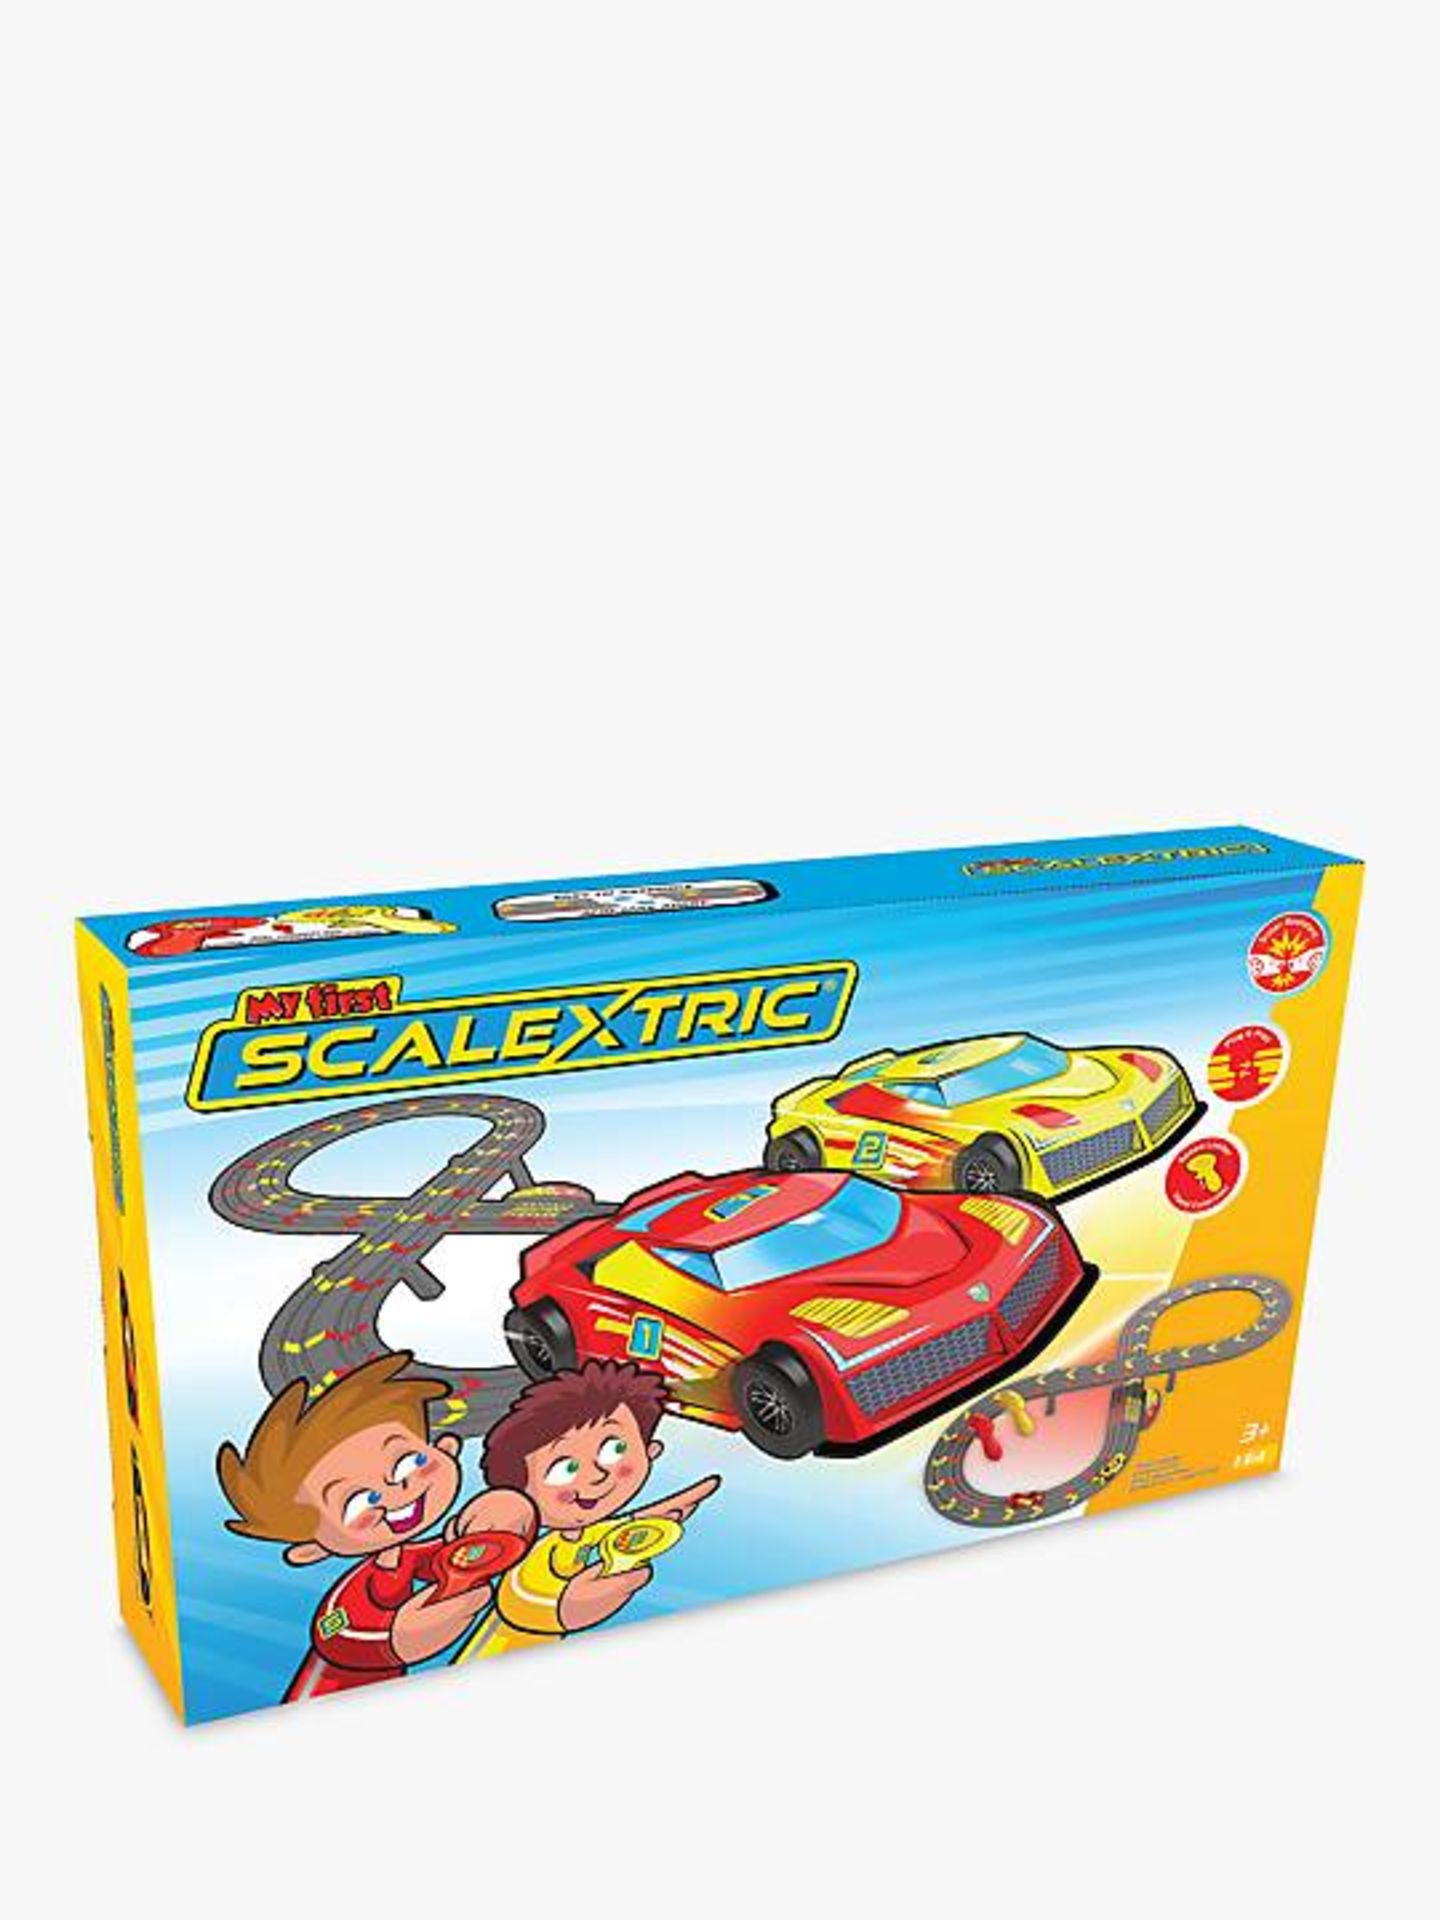 Pallet of Raw Customer Returns - Category - TOYS - P100126959 - Image 24 of 29